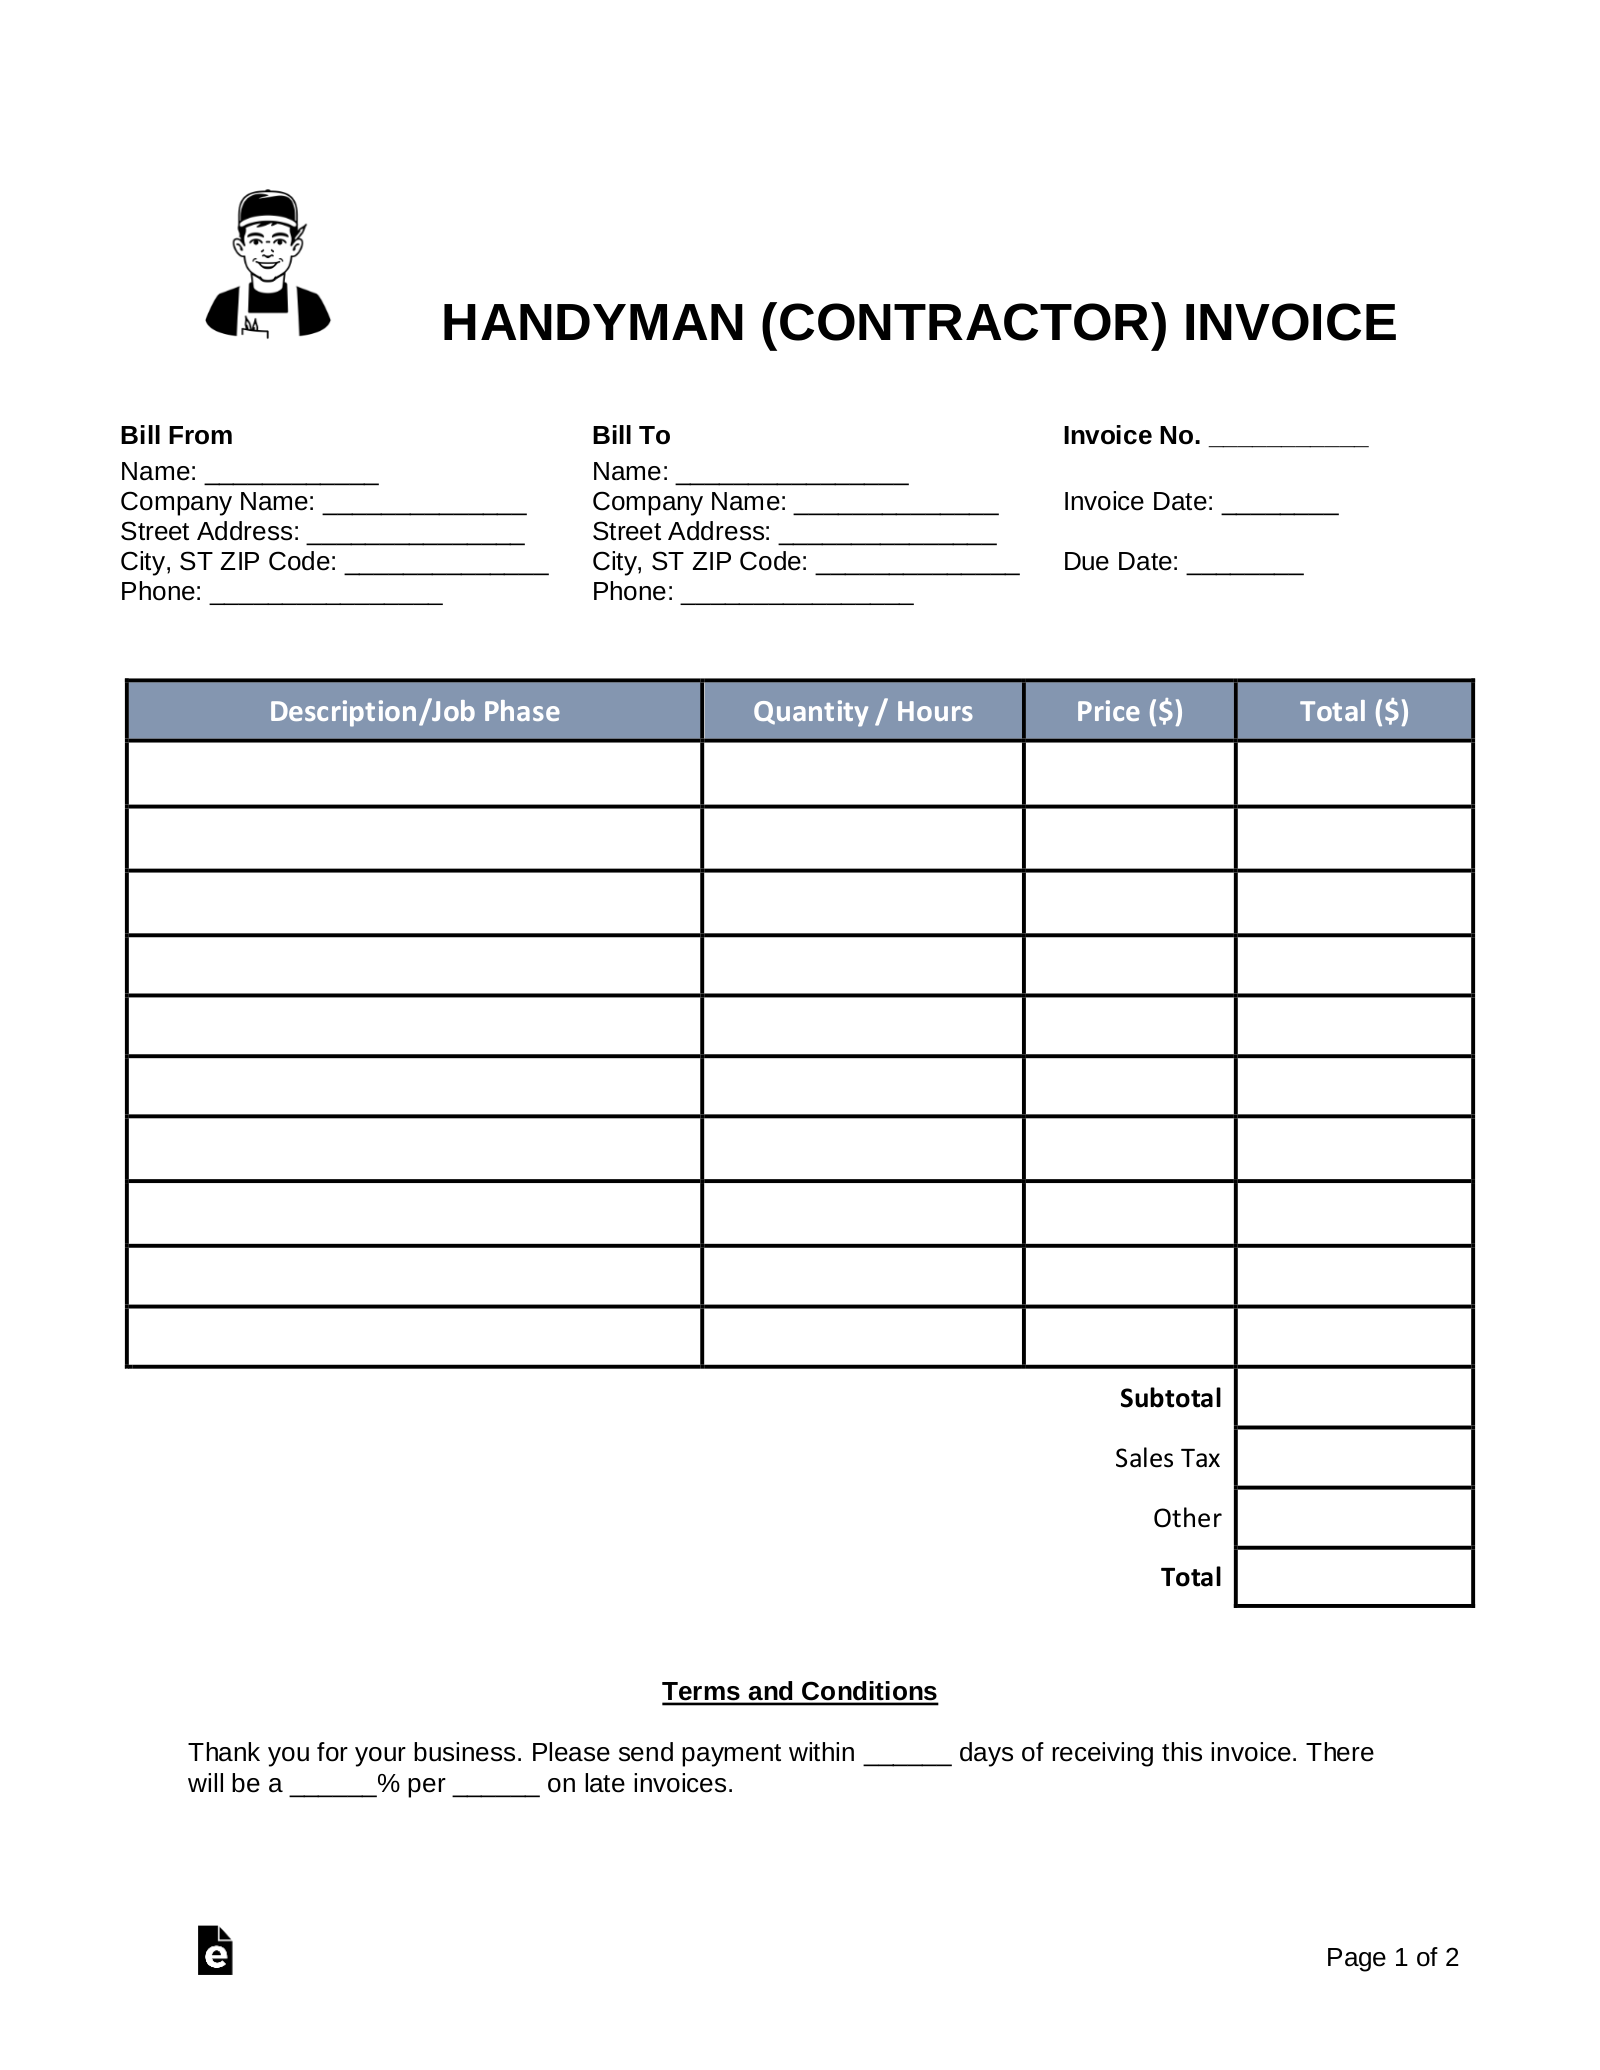 Free Handyman Contractor Invoice Template PDF Word EForms